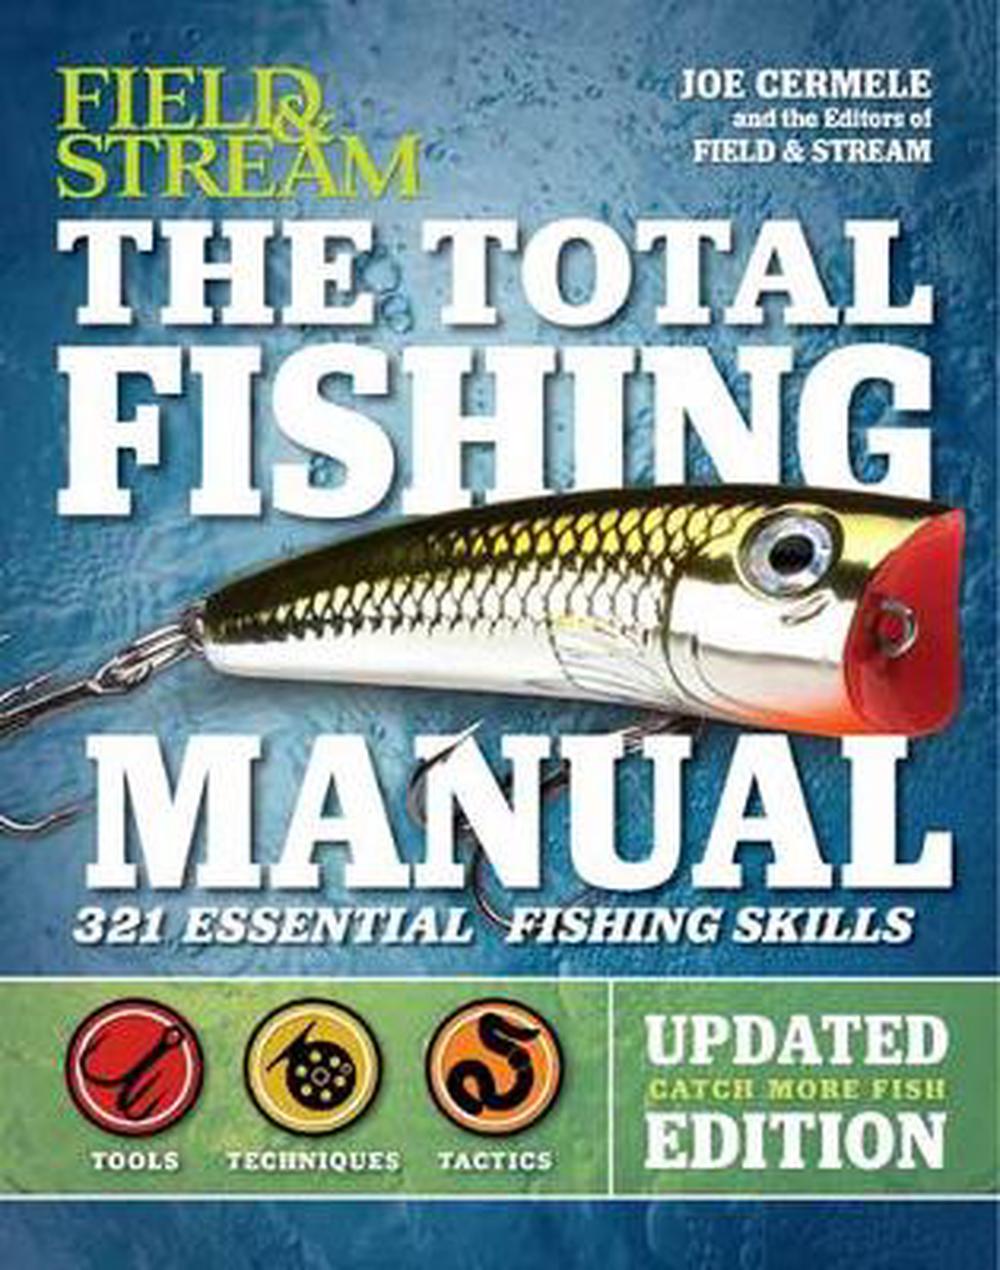 for sale online The Total Fishing Manual 2017, Trade Paperback : 317 Essential Fishing Skills by Joe Cermele Paperback Edition 